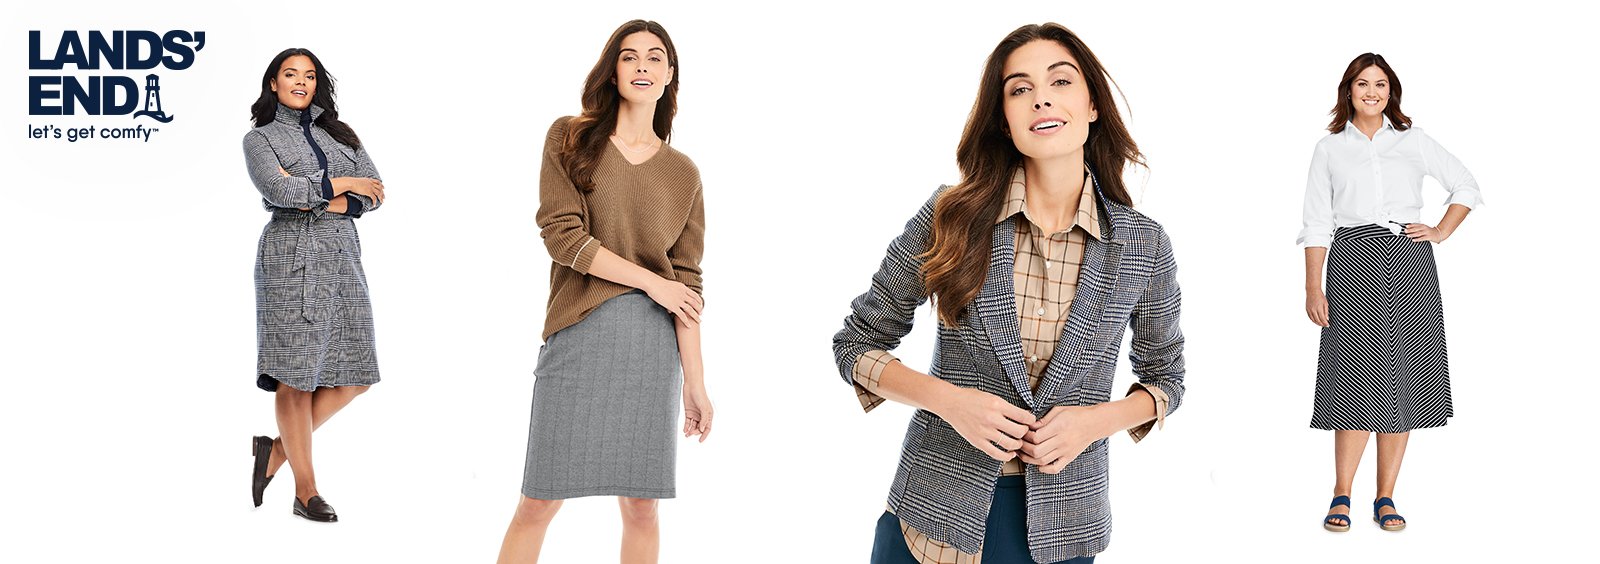 Business Casual Looks for Spring